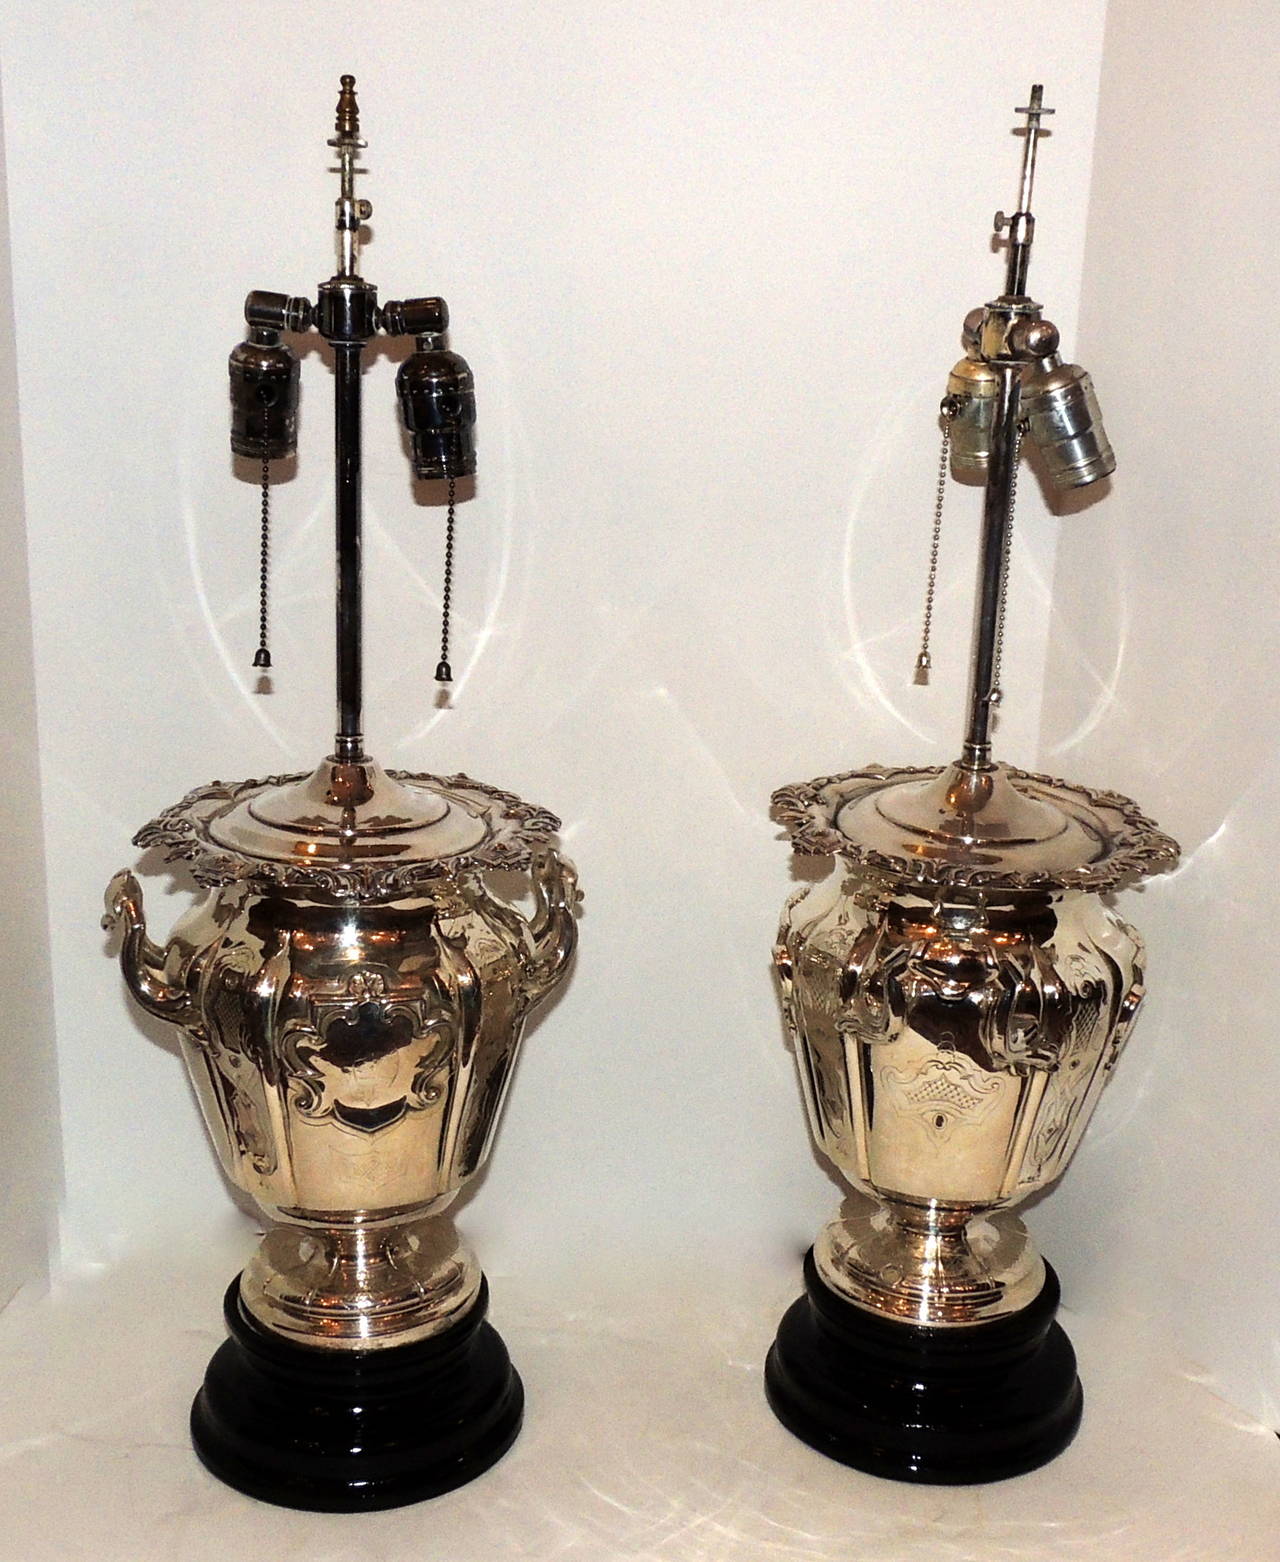 A wonderful unique pair of silver plated lamps with two lights. Appears to have been made from antique silver plated champagne coolers. Beautiful engraved design surrounds the 10" high center, delicately shaped handles and scalloped and